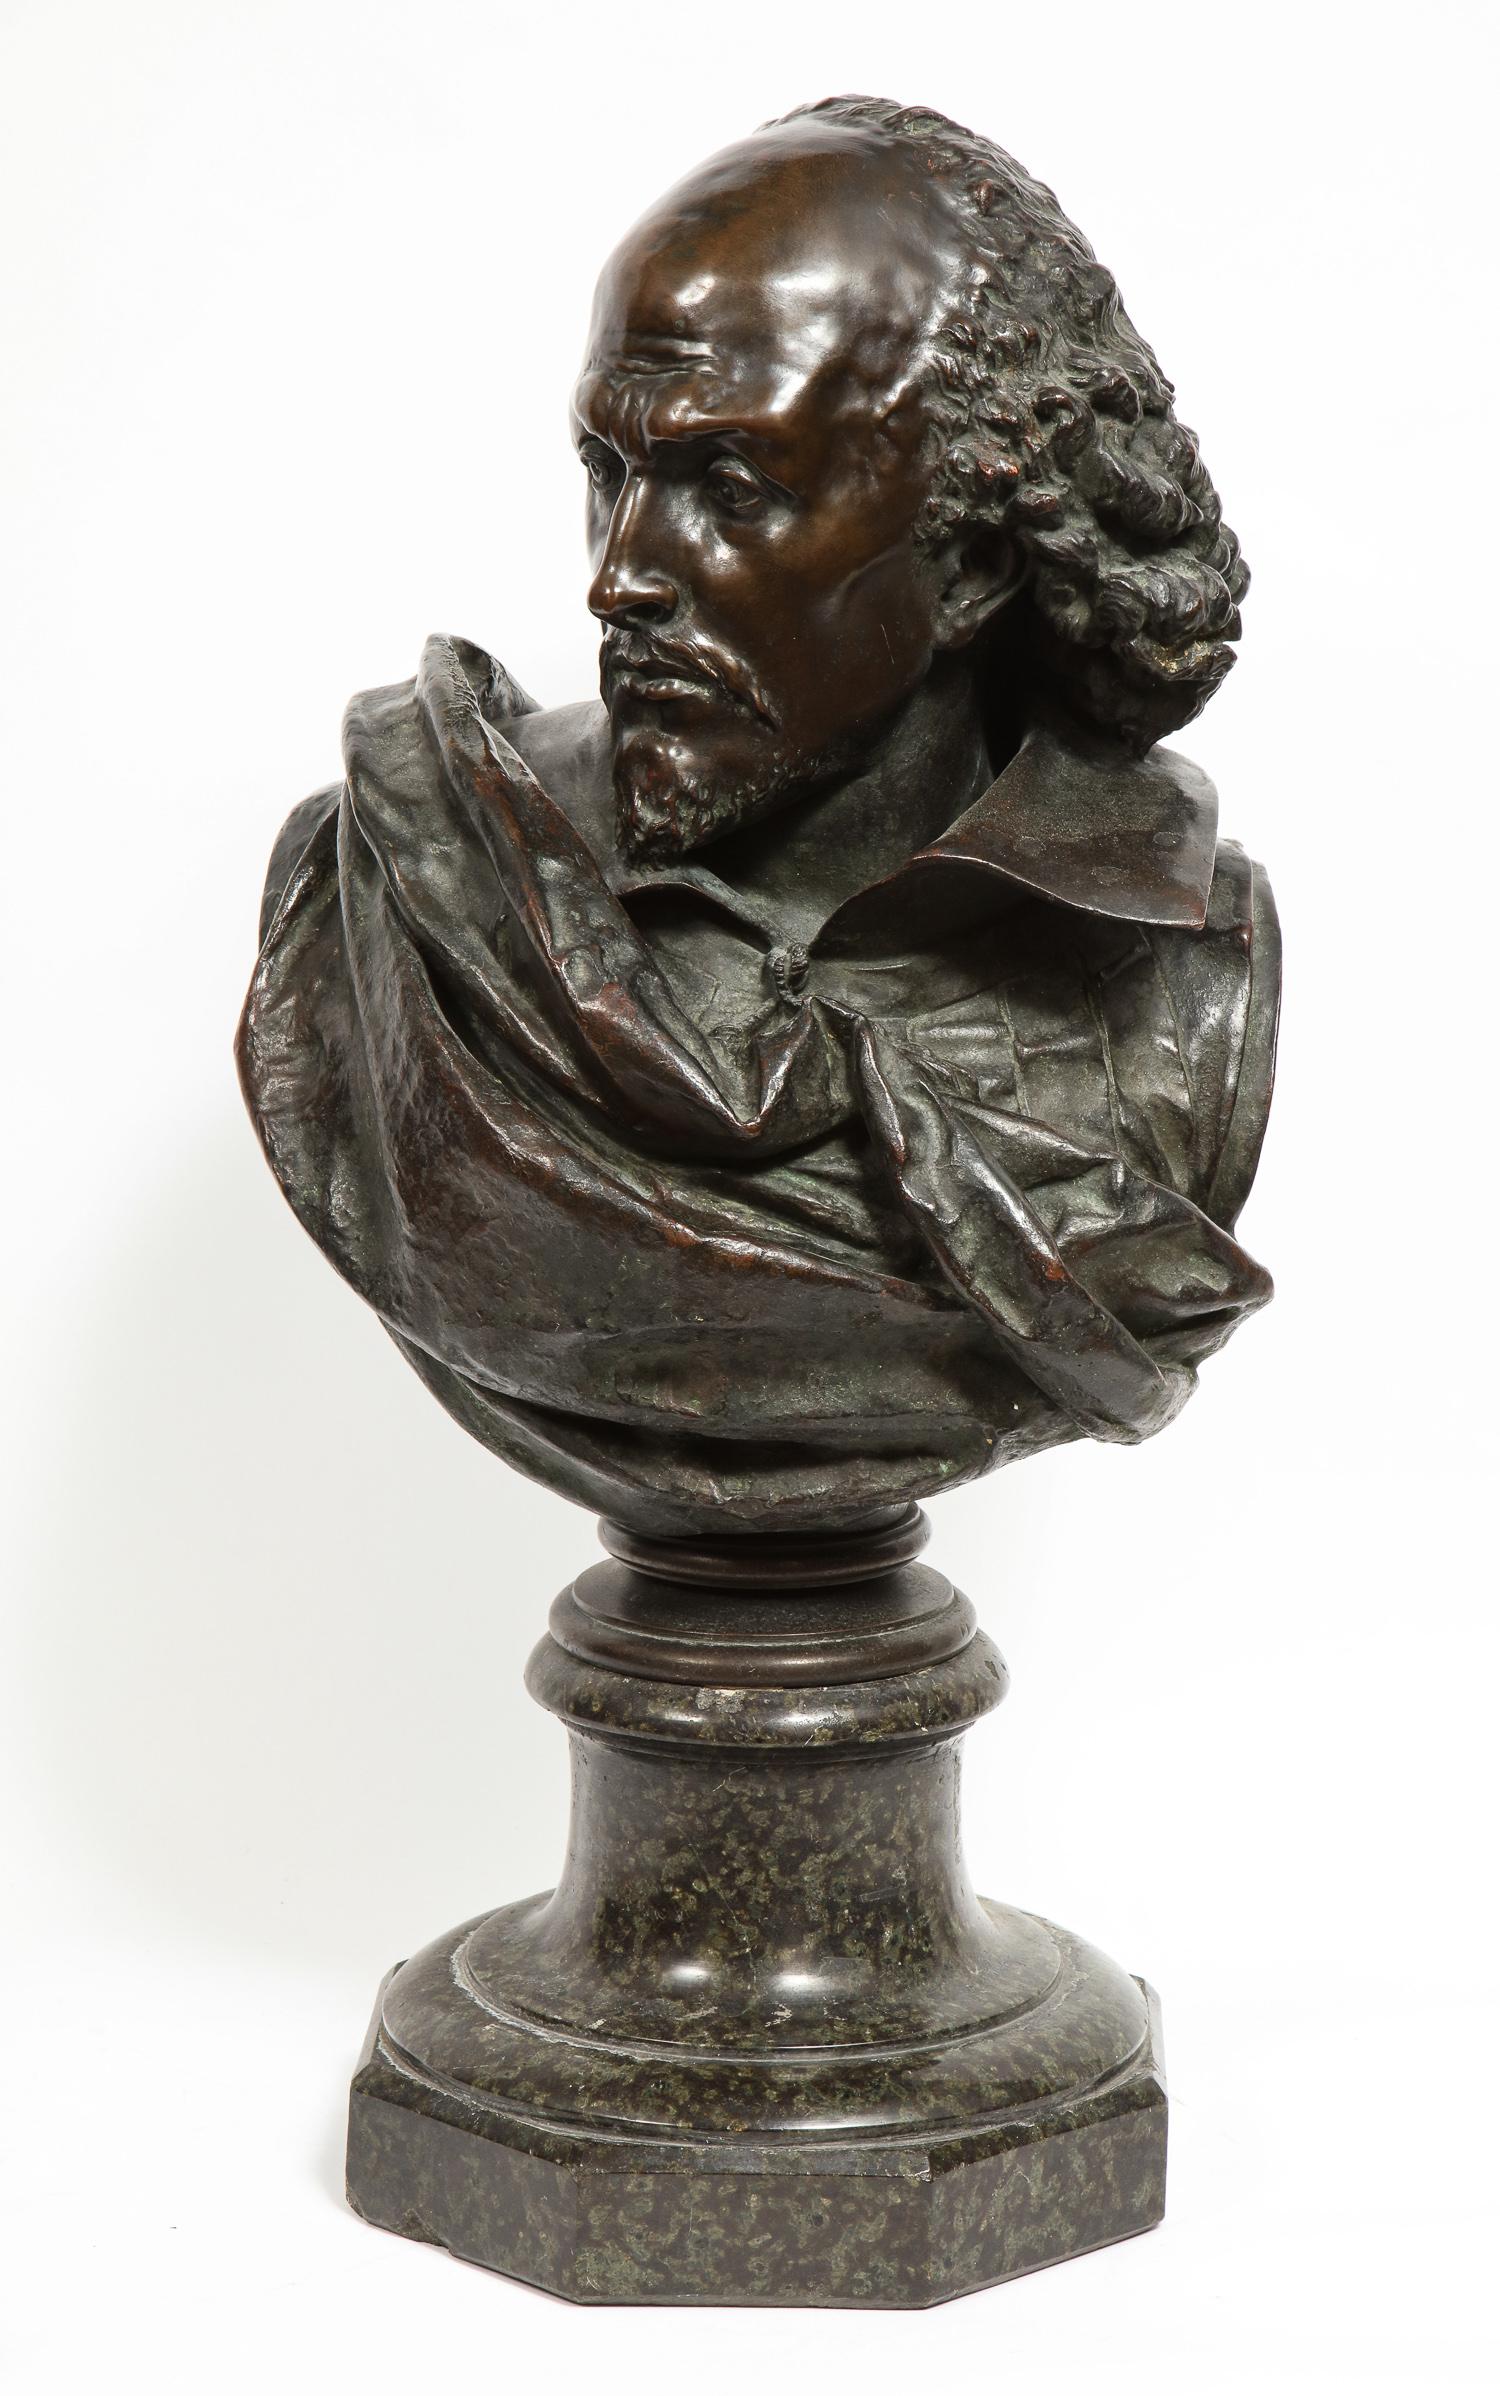 19th Century Rare French Patinated Bronze Bust of William Shakespeare, Carrier-Belleuse